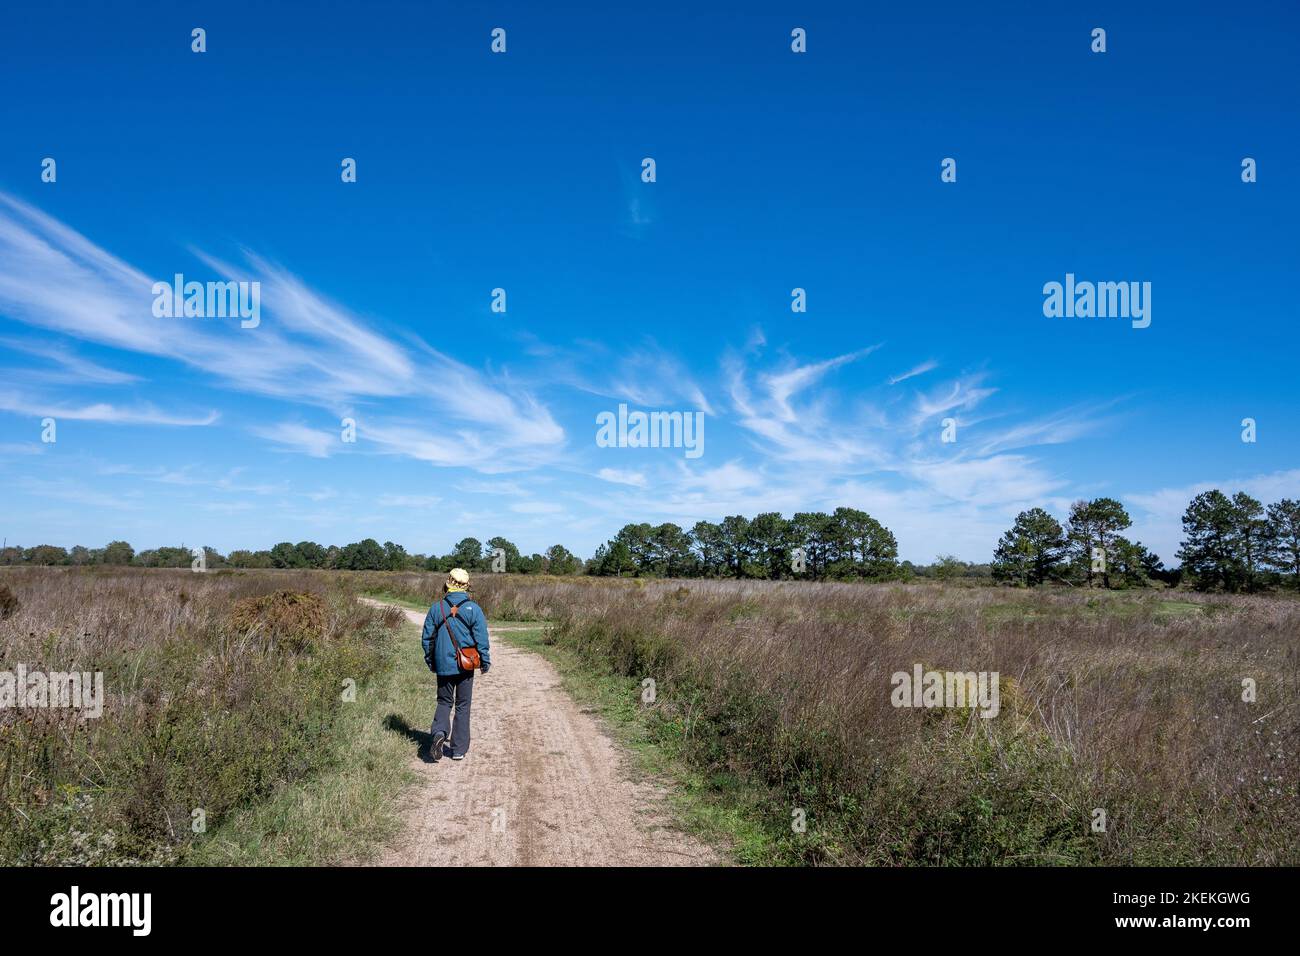 Location A woman walking on the trail at the Katy Prairie Conservancy Indiangrass Preserve. Houston, Texas, USA. Stock Photo